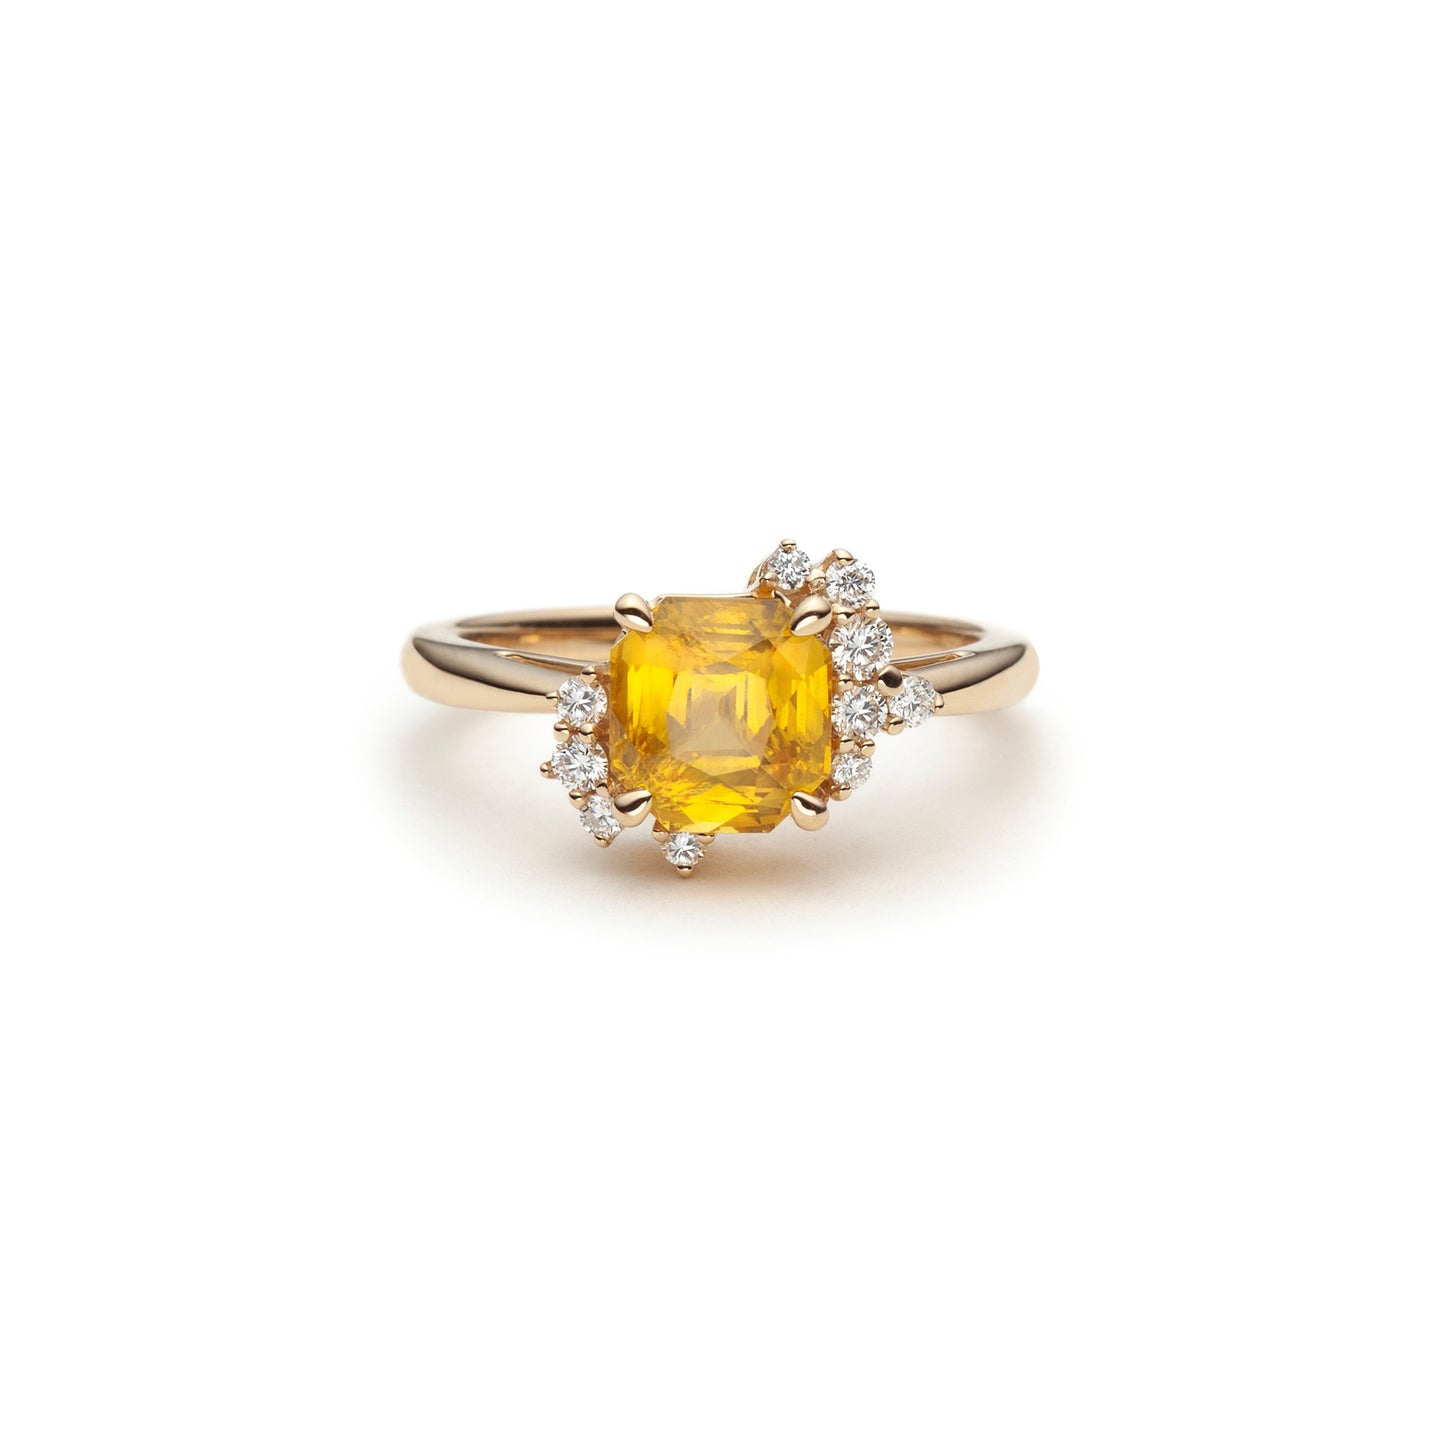 One of a kind yellow sapphire and diamond asymmetric ring